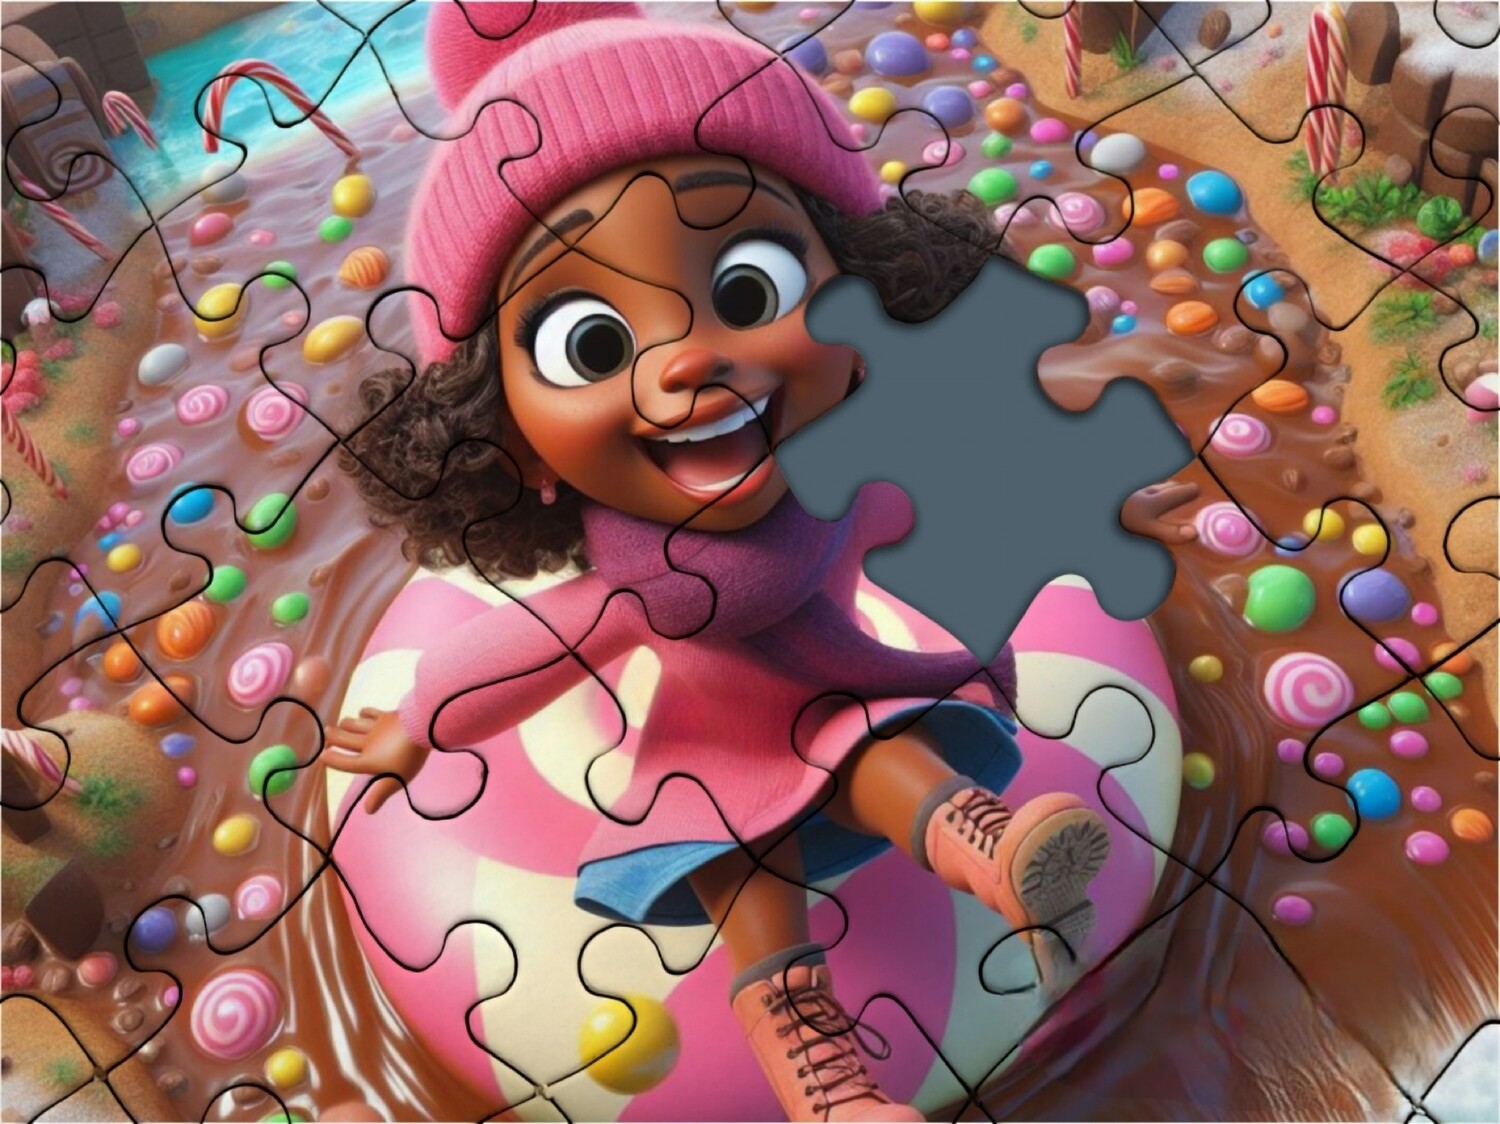 Jigsaw Puzzle - Carly in Candy Island - short story included 